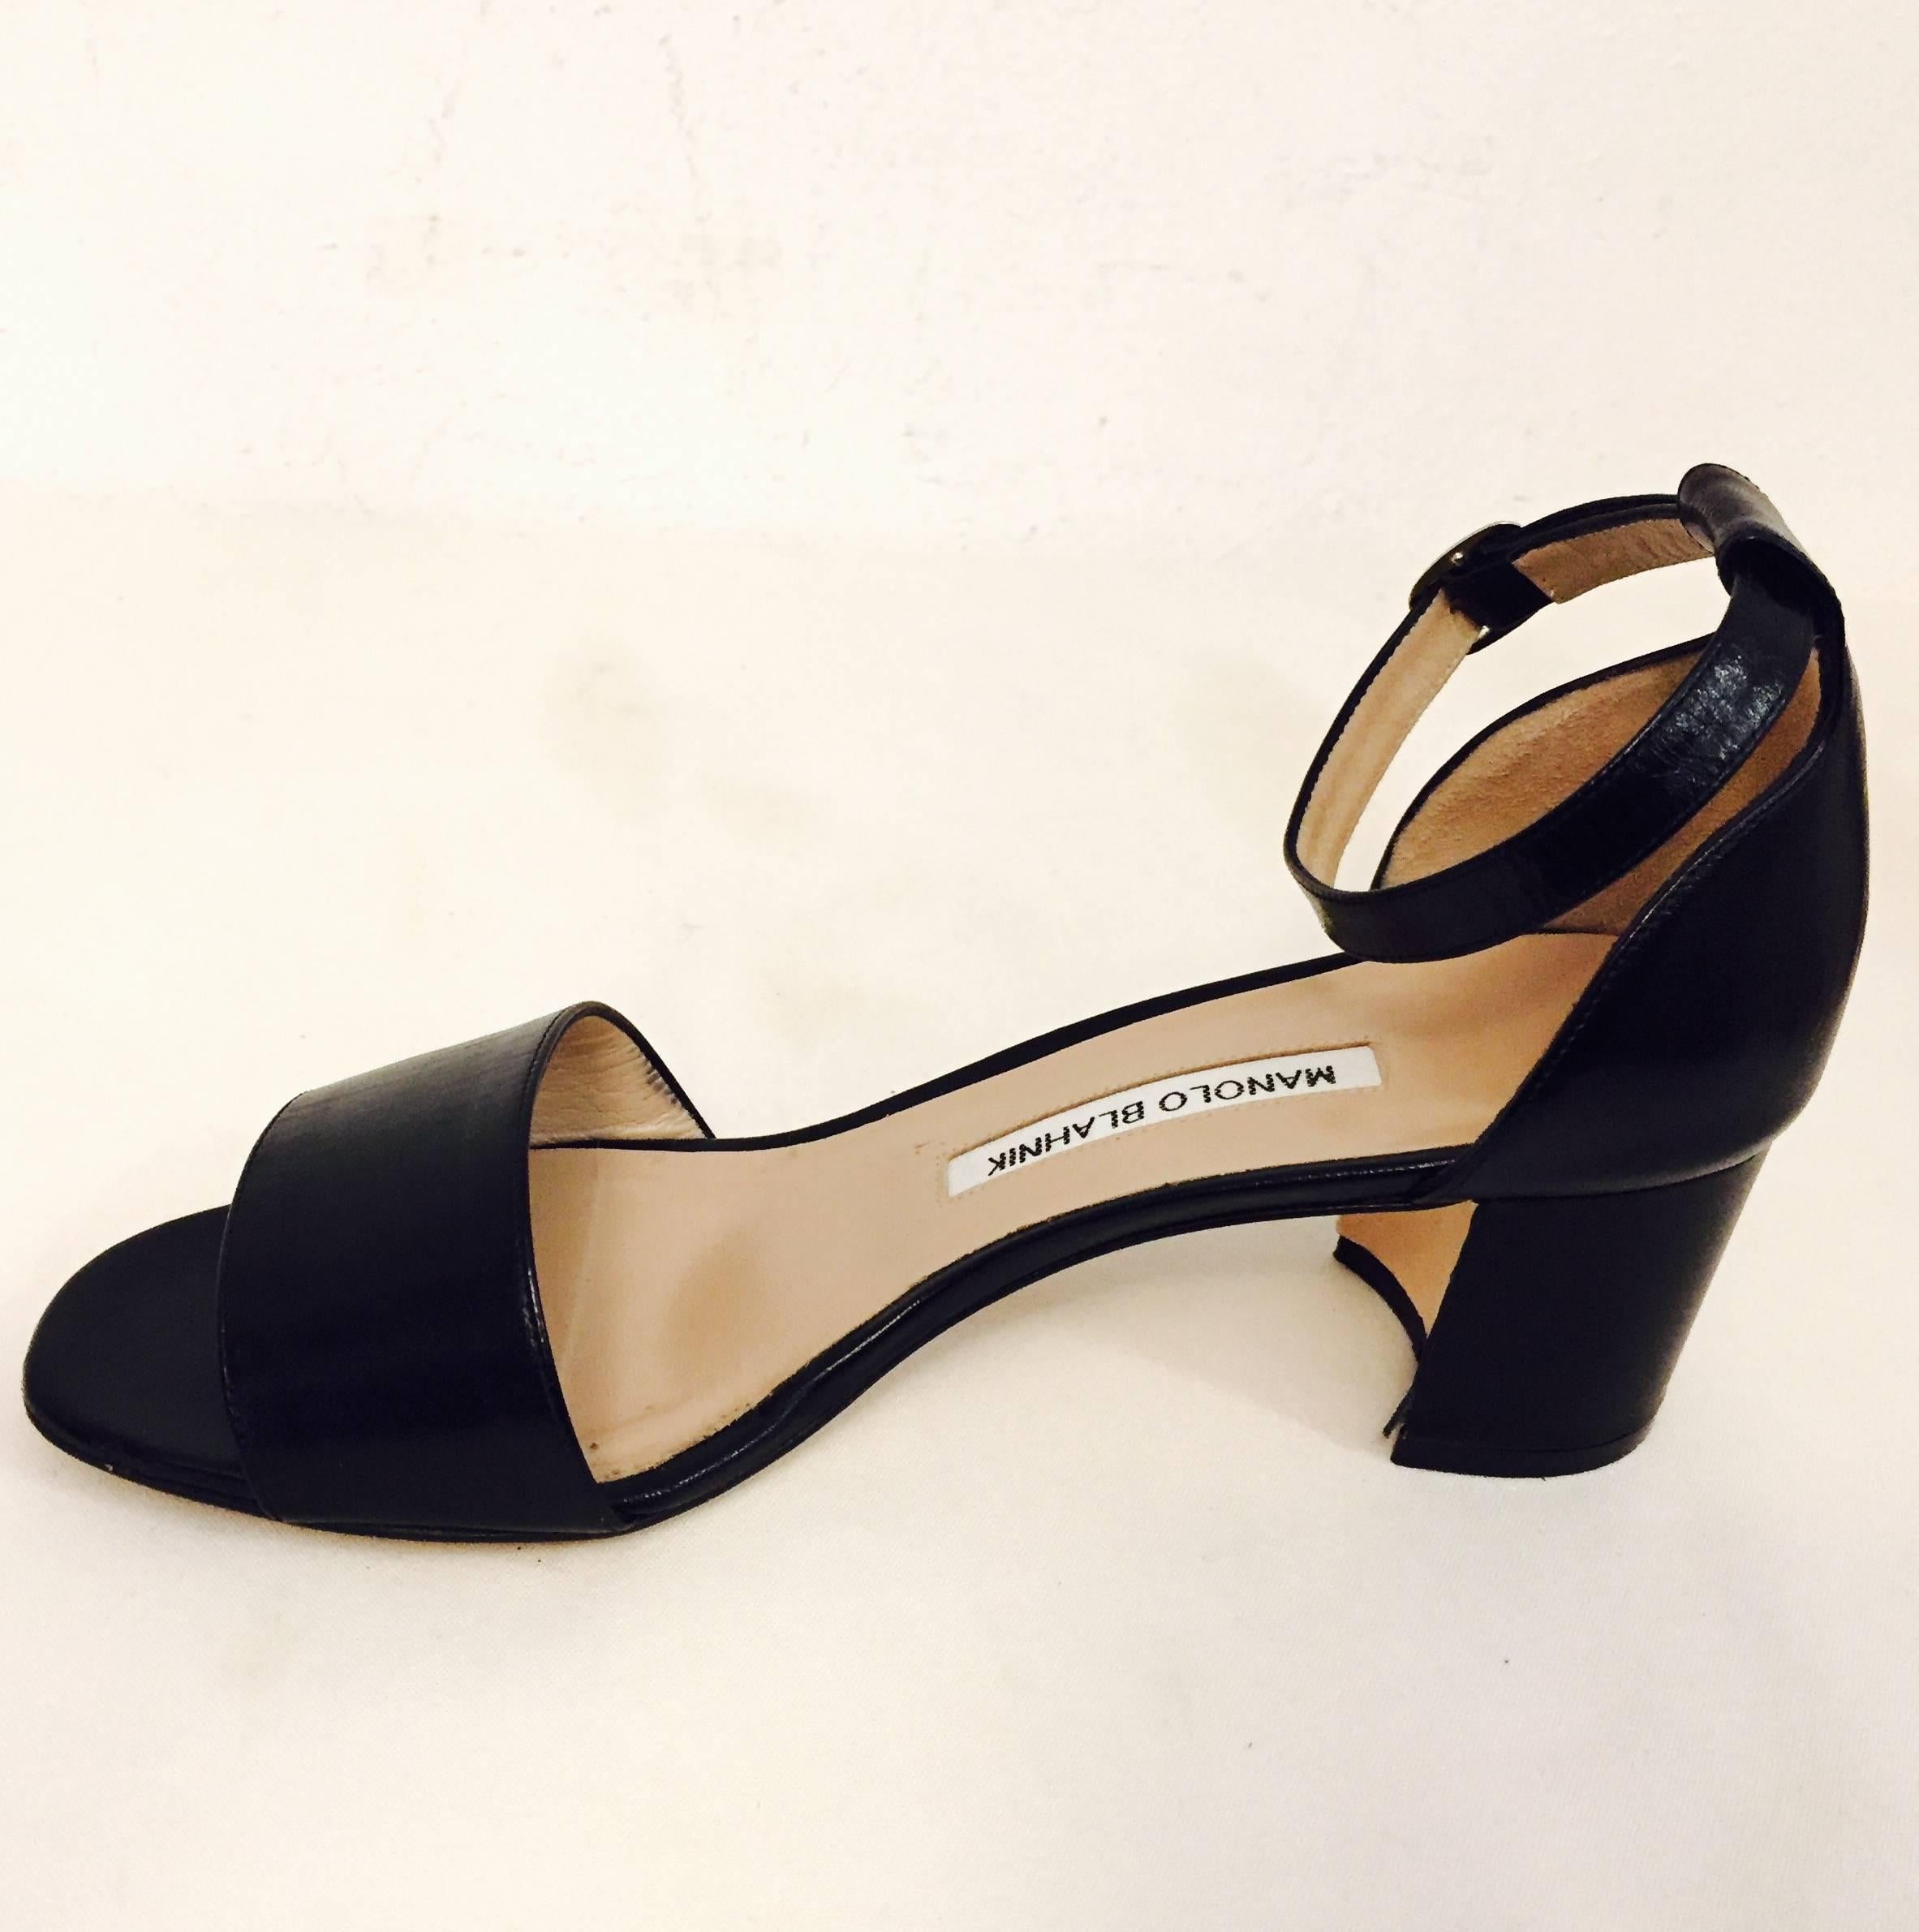 Manolo Blahnik's Lauratomod Black Leather Sandals features single strap design and sculpted block heels.   Ankle straps assure proper support and comfortable wear.   Tan Leather soles, insoles, and lining.   Silver tone buckles complete the look. 